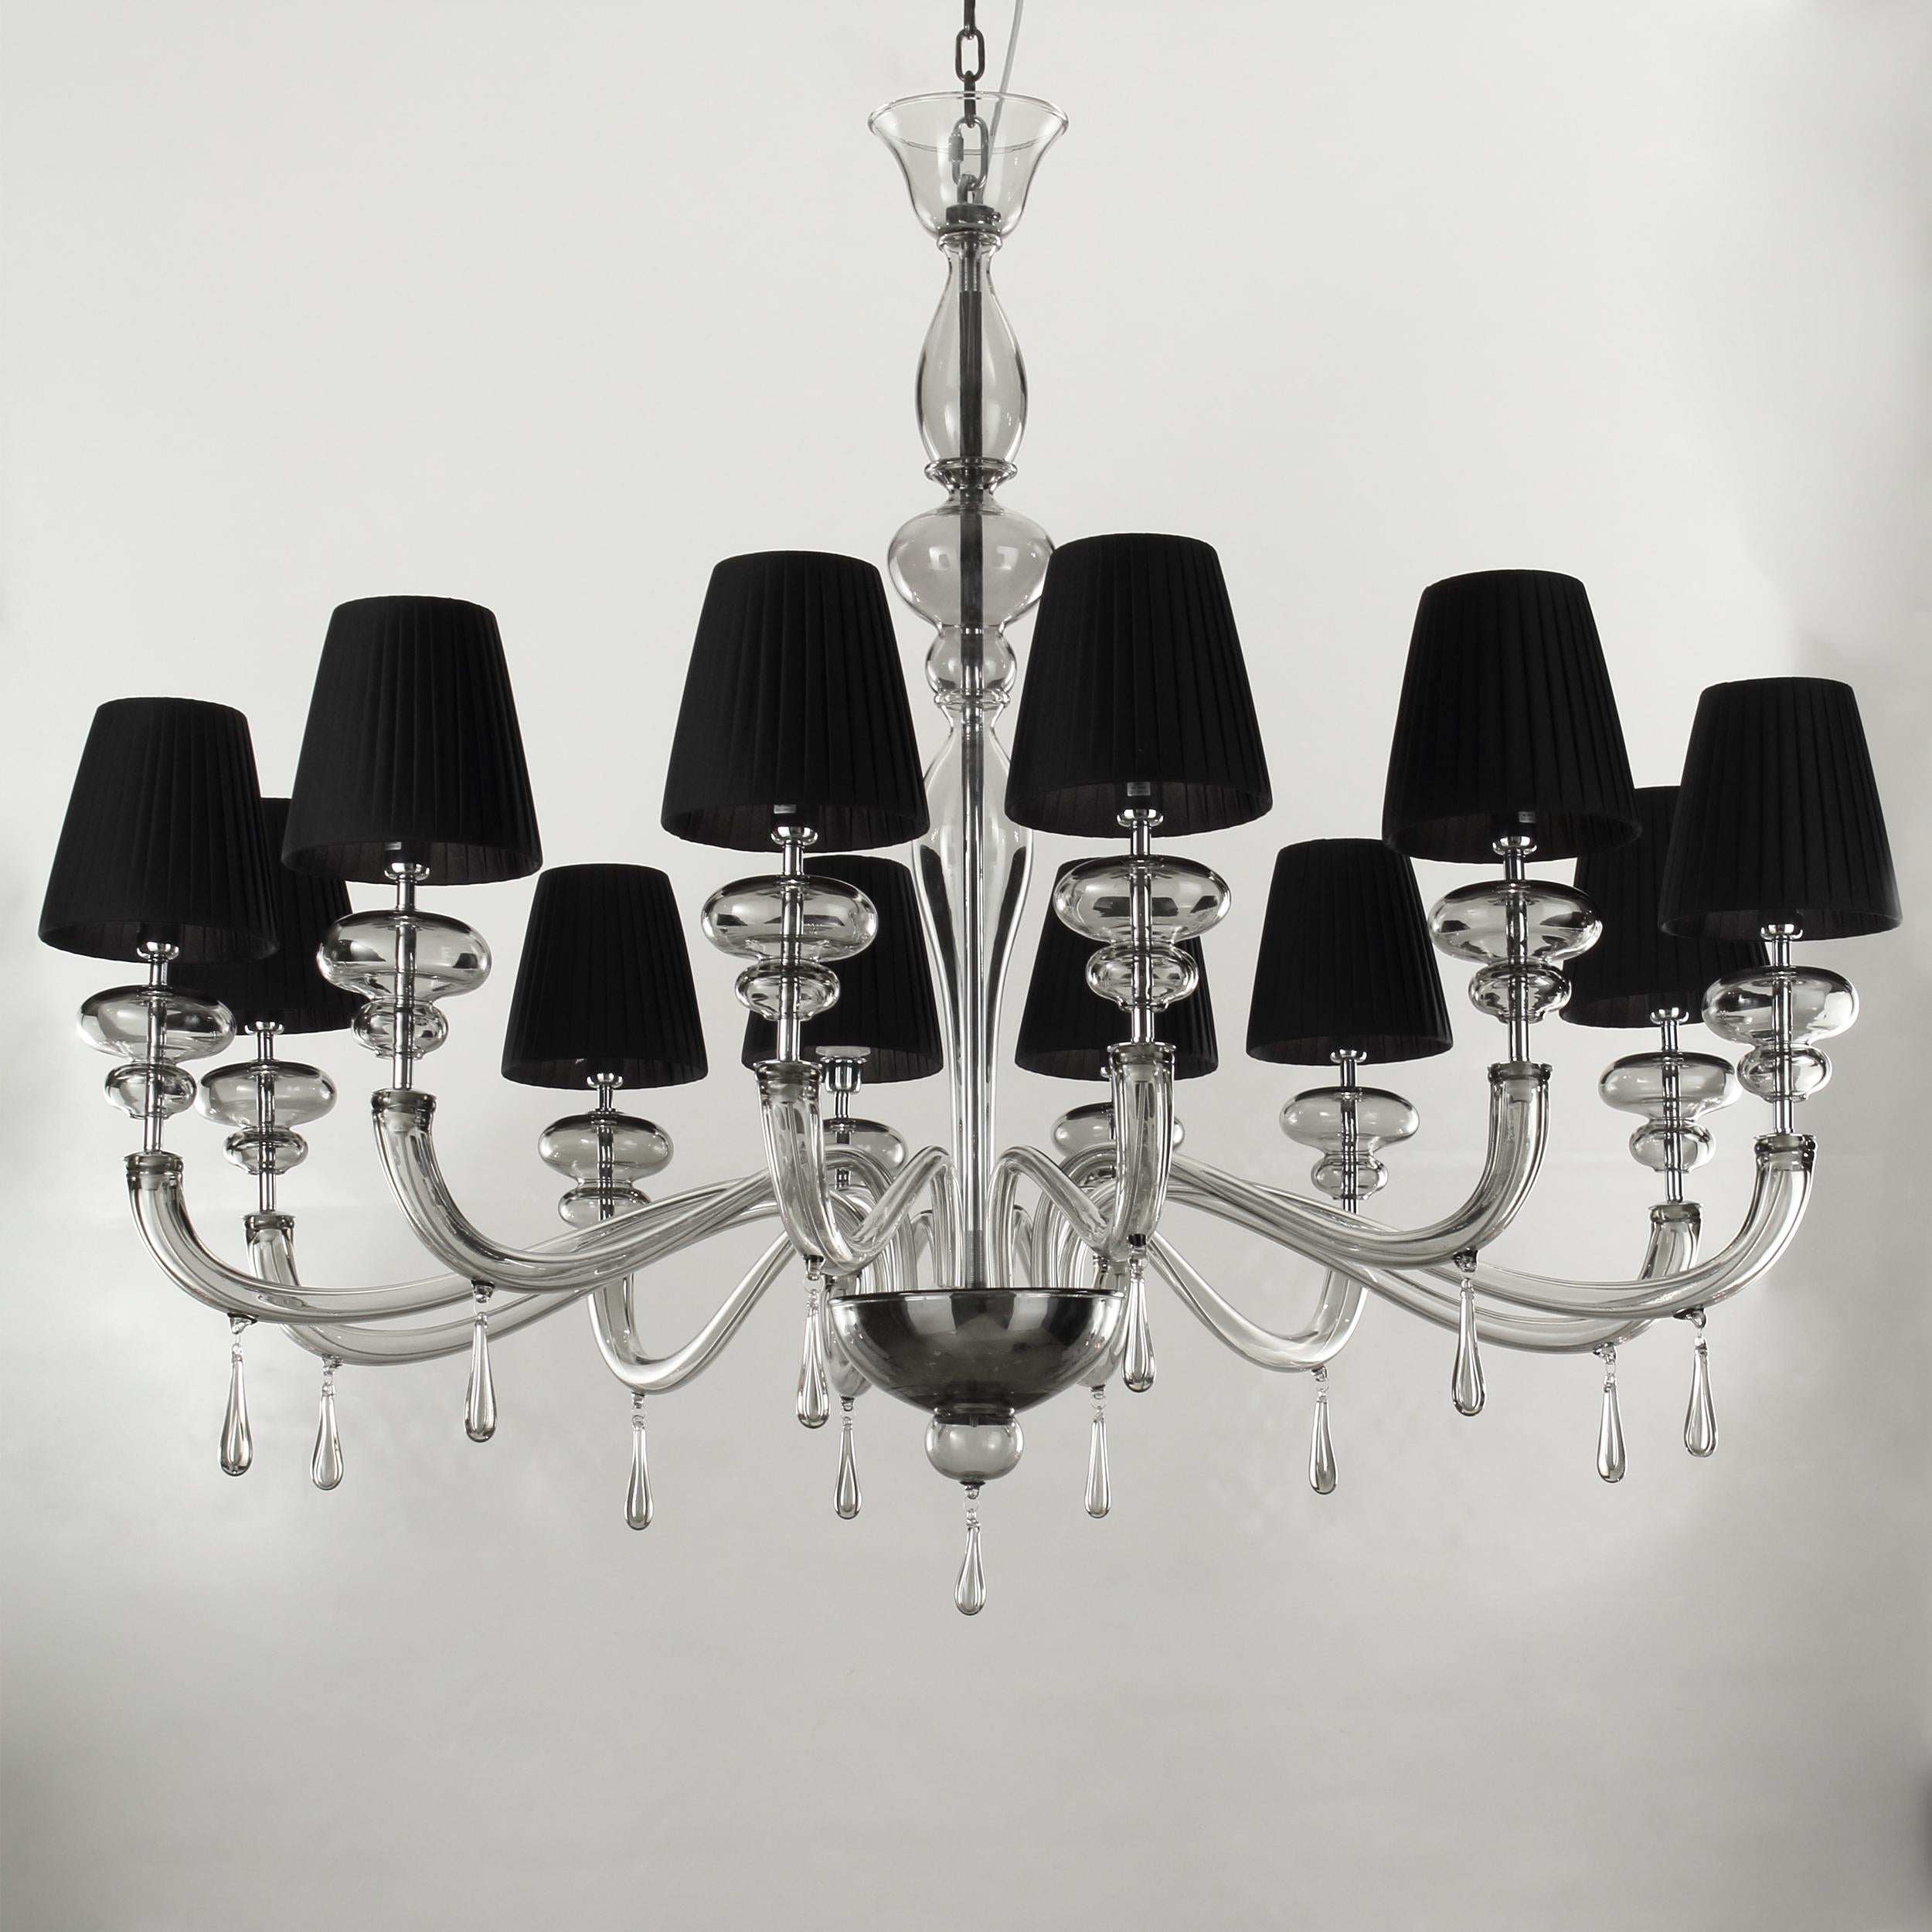 Modern Elegant chandelier 12 lights grey murano Glass, black lampshades by Multiforme
A collection of chandeliers and wall lights made of Murano glass. The surface of the glass is smooth, the metal details are nickel plated (or gold plated) and the